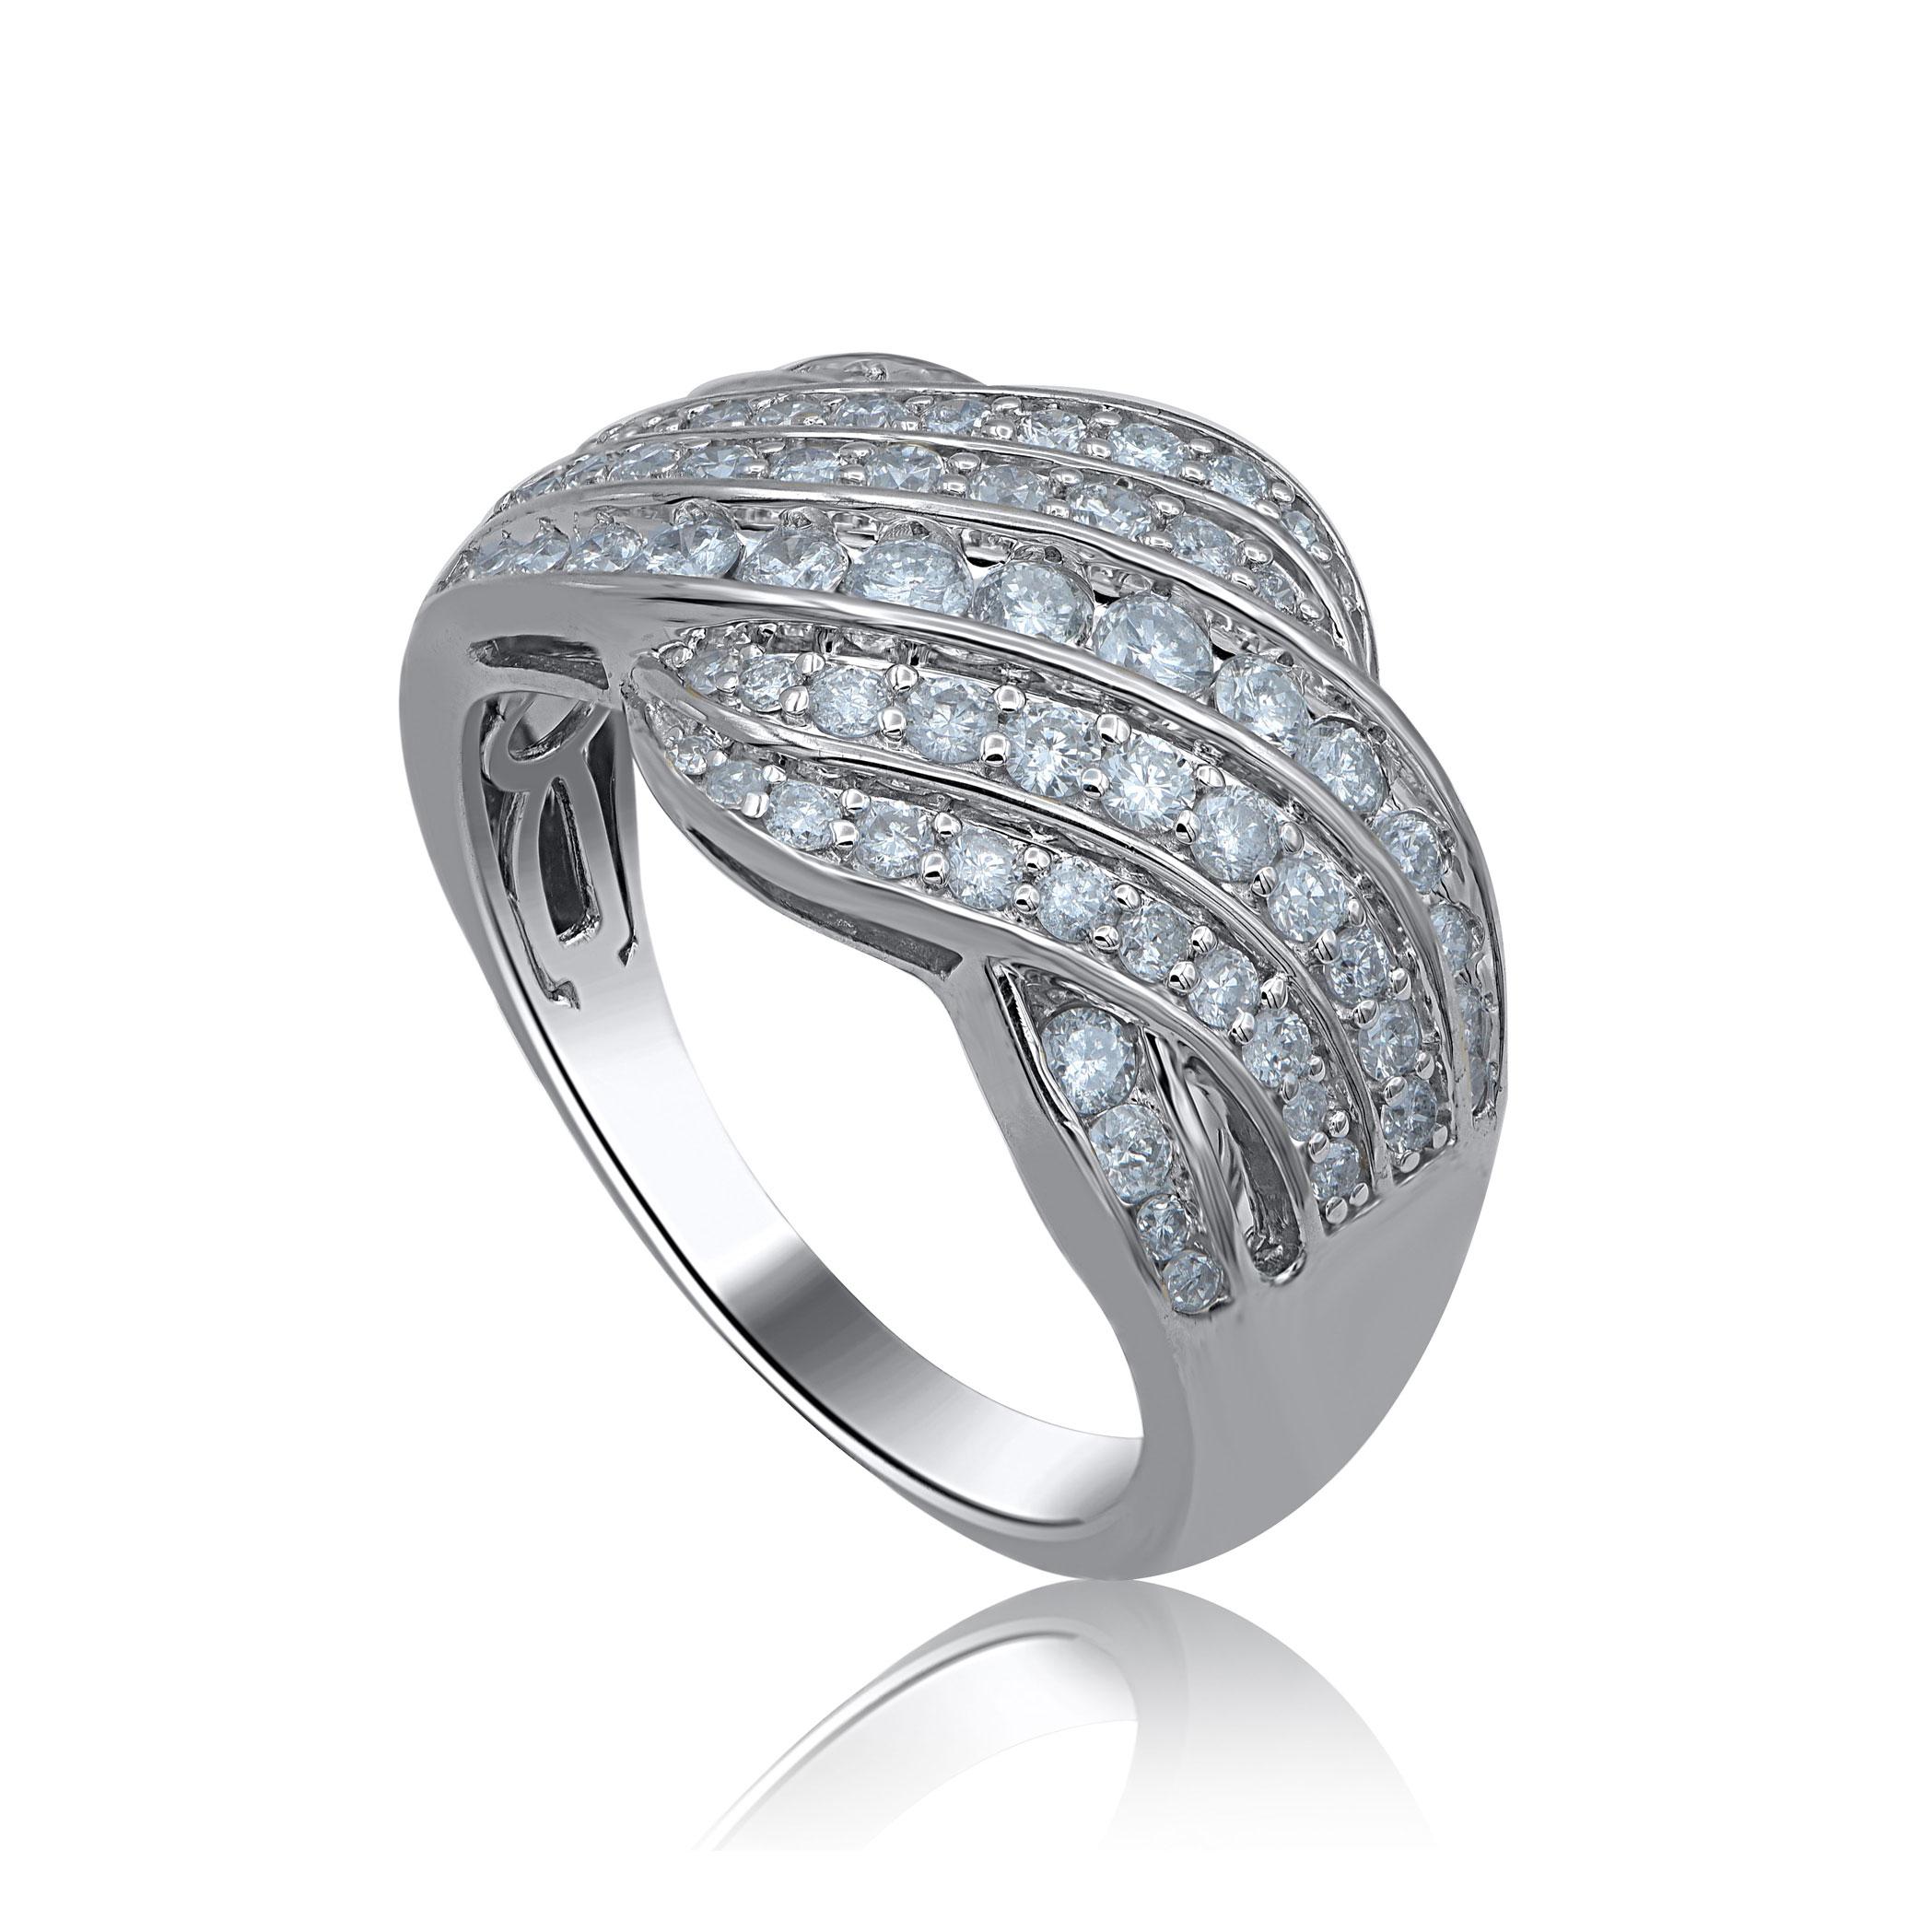 Truly exquisite, this  Multi row wave wide diamond  ring is sure to be admired for the inherent classic beauty and elegance within its design. The total weight of diamonds 1.00 carat, H-I color, I2 Clarity and studded with 67 round brilliant